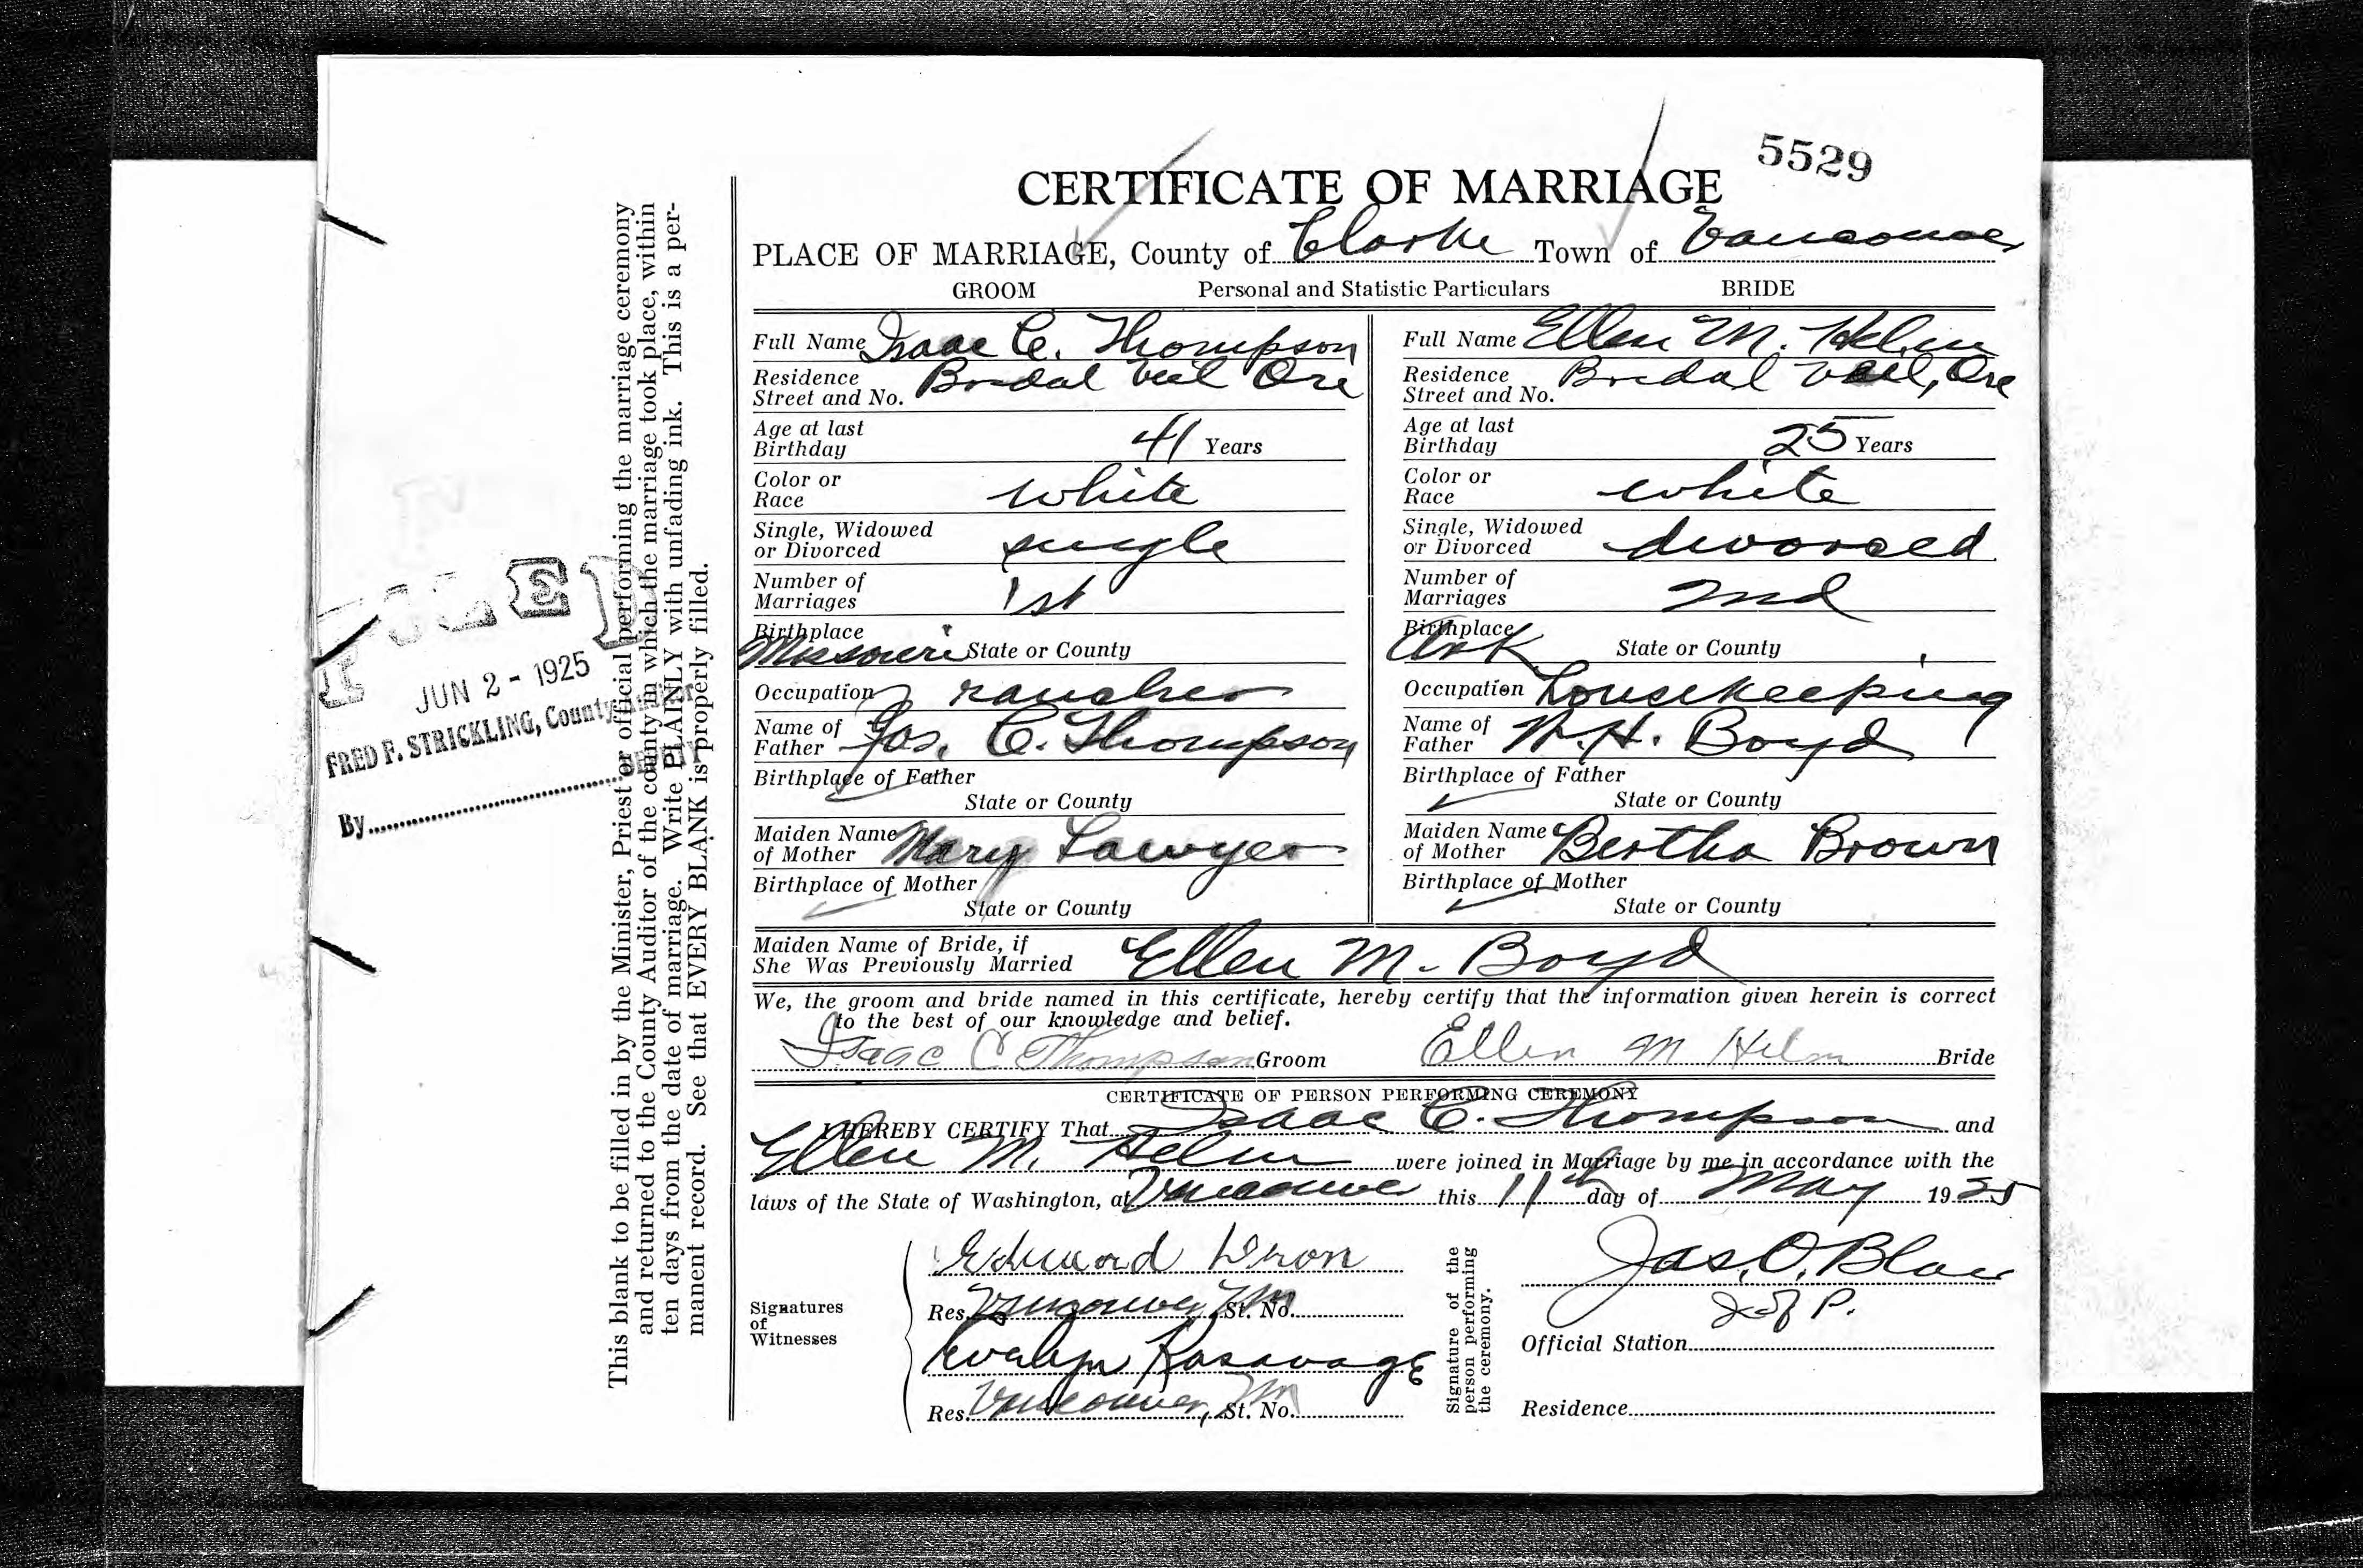 Certificate of marriage of Isaac C. Thompson and Ellen M. Helm, page 1